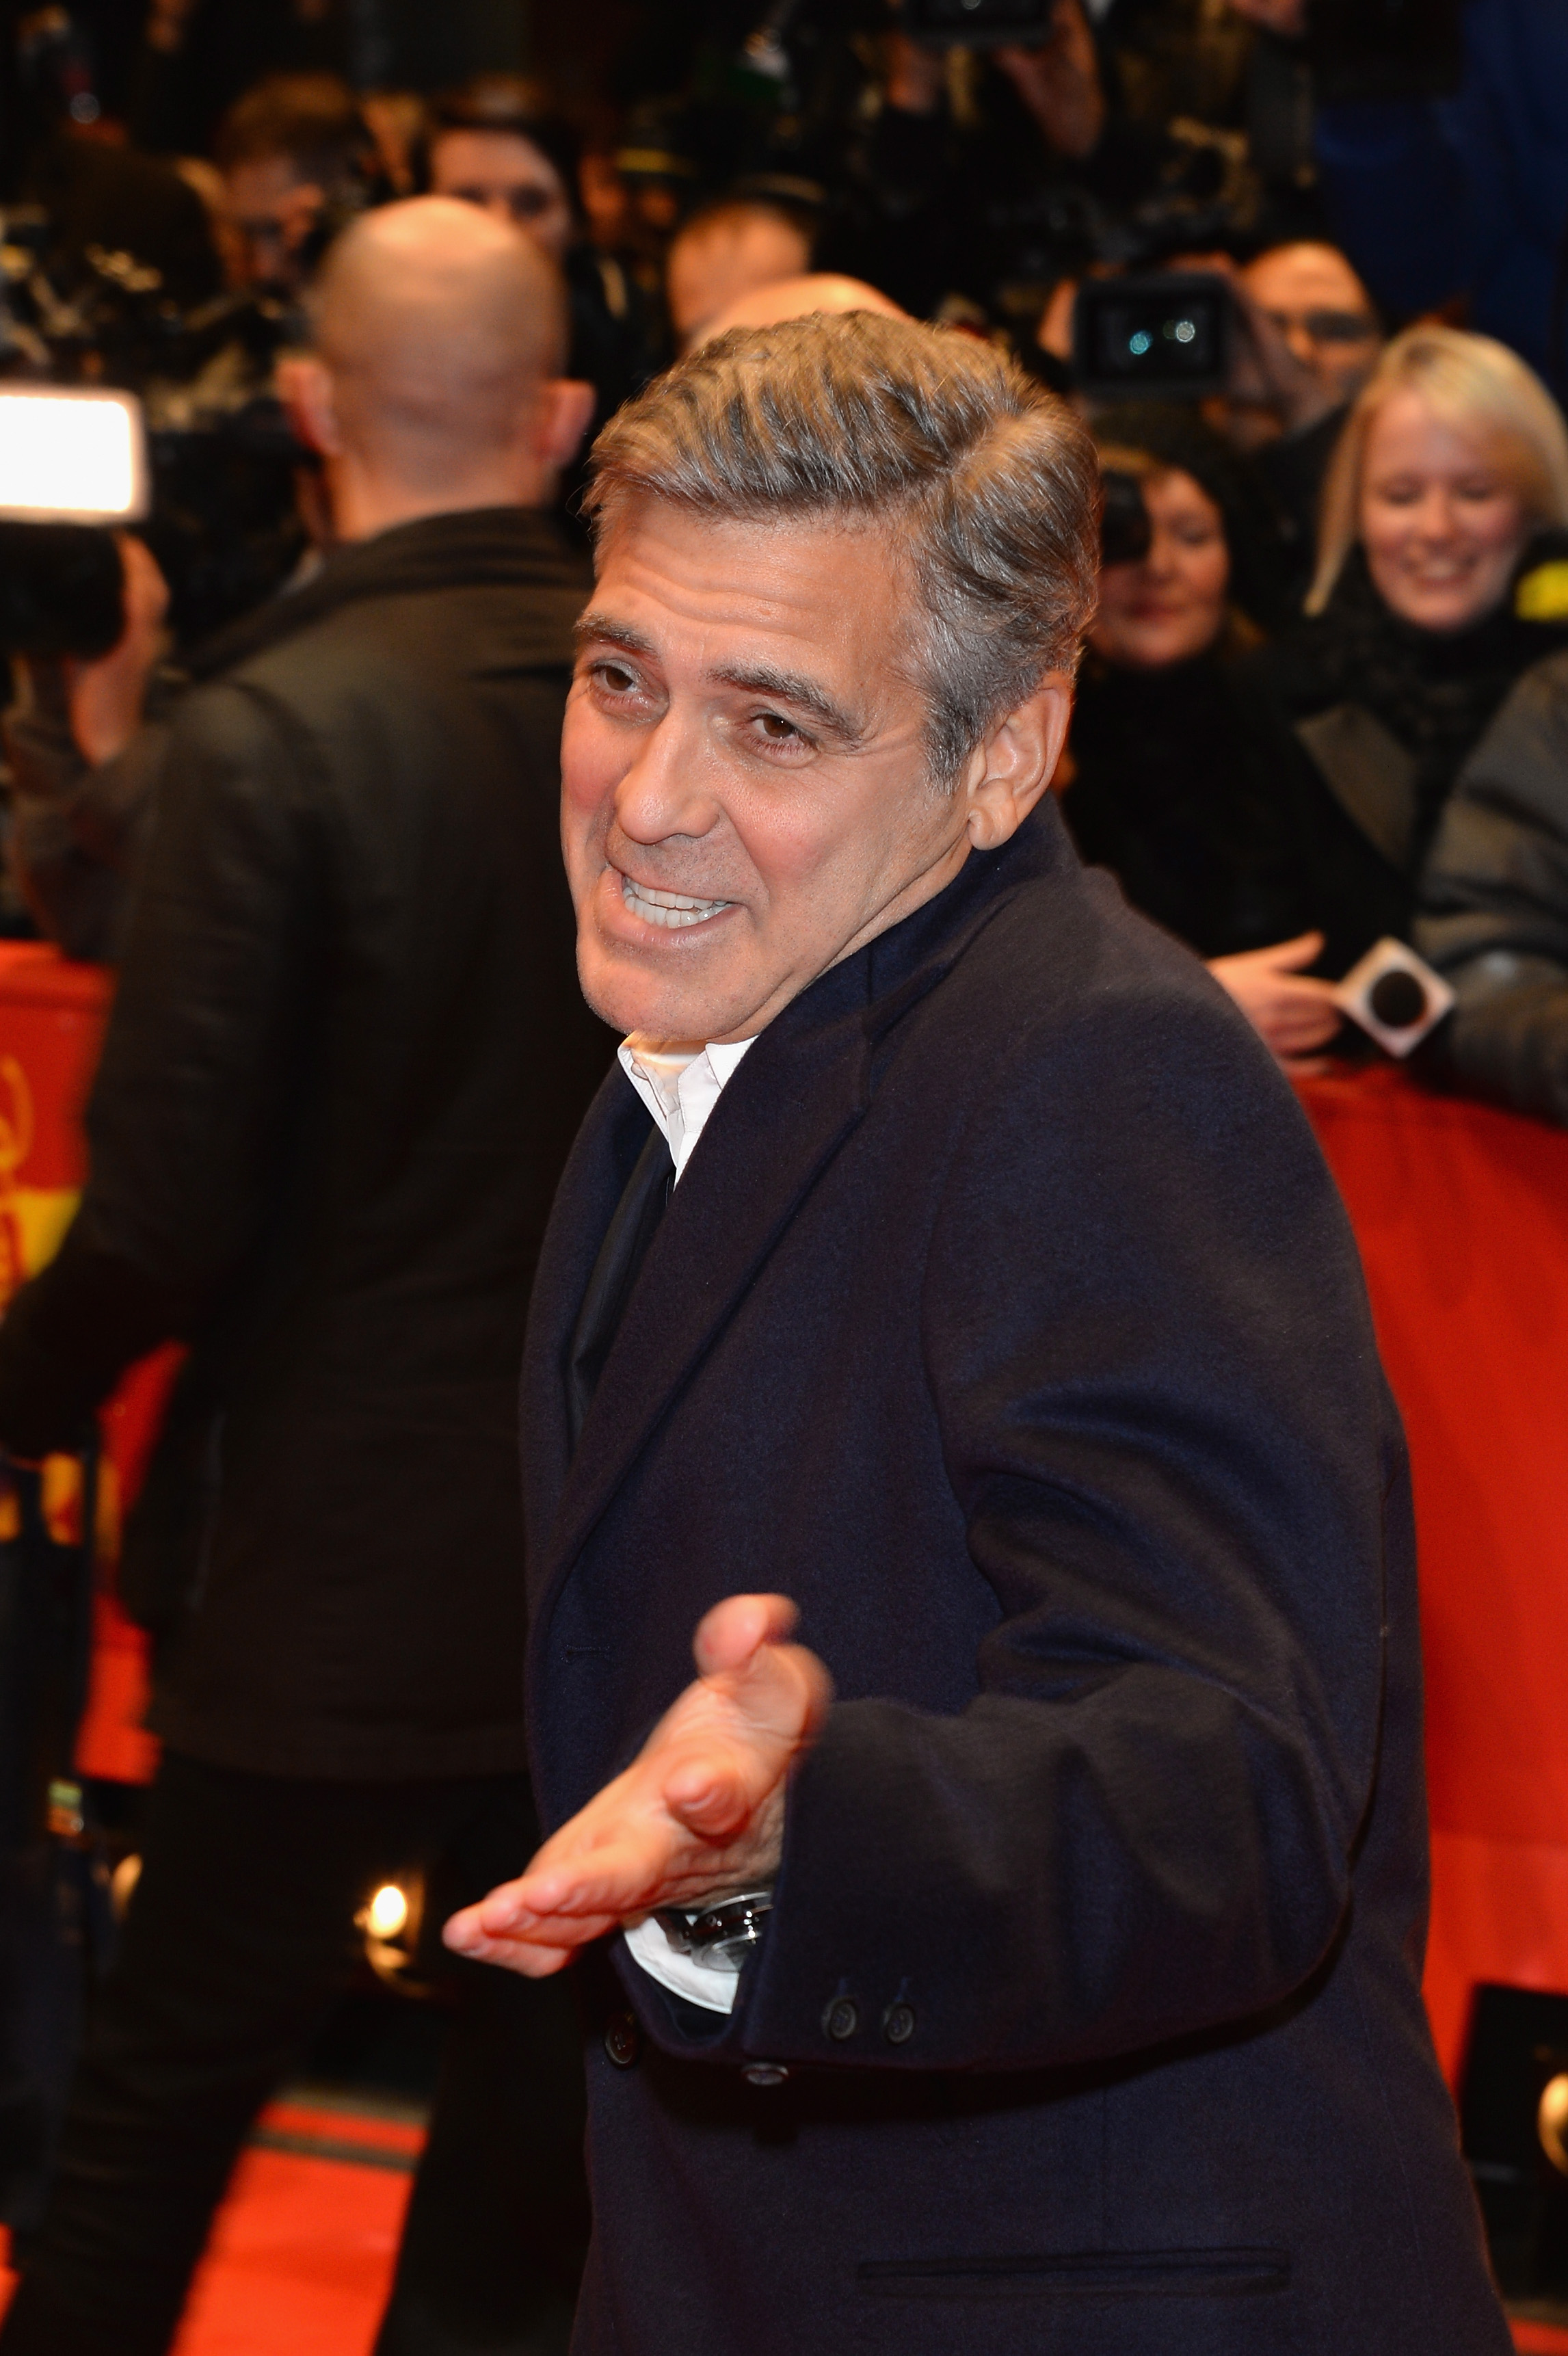 George Clooney attends <i>The Monuments Men</i> premiere during the 64th Berlinale International Film Festival in Berlin on Feb. 8, 2014 (Luca Teuchmann&mdash;WireImage)